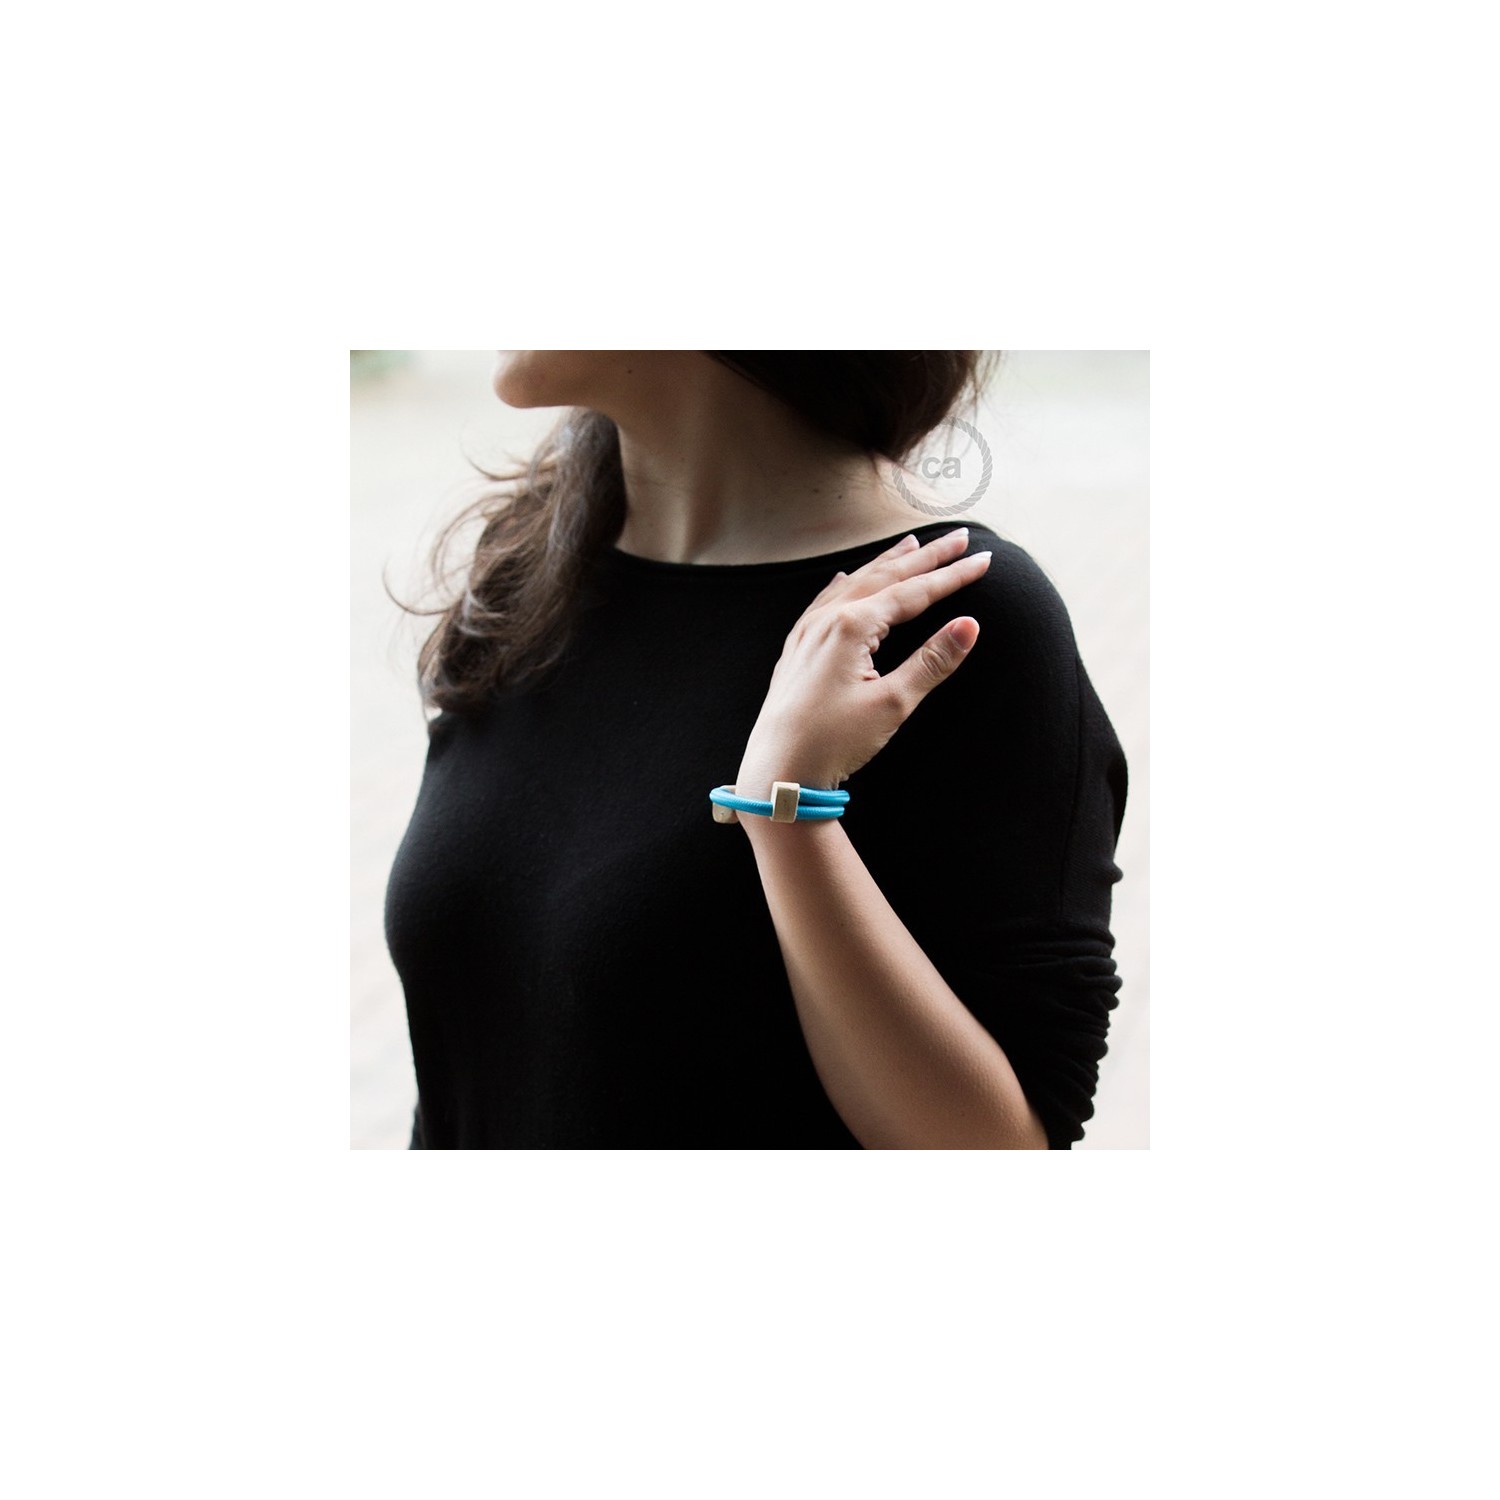 Creative-Bracelet in Rayon solid color turquoise fabric RM11. Wood sliding fastening. Made in Italy.